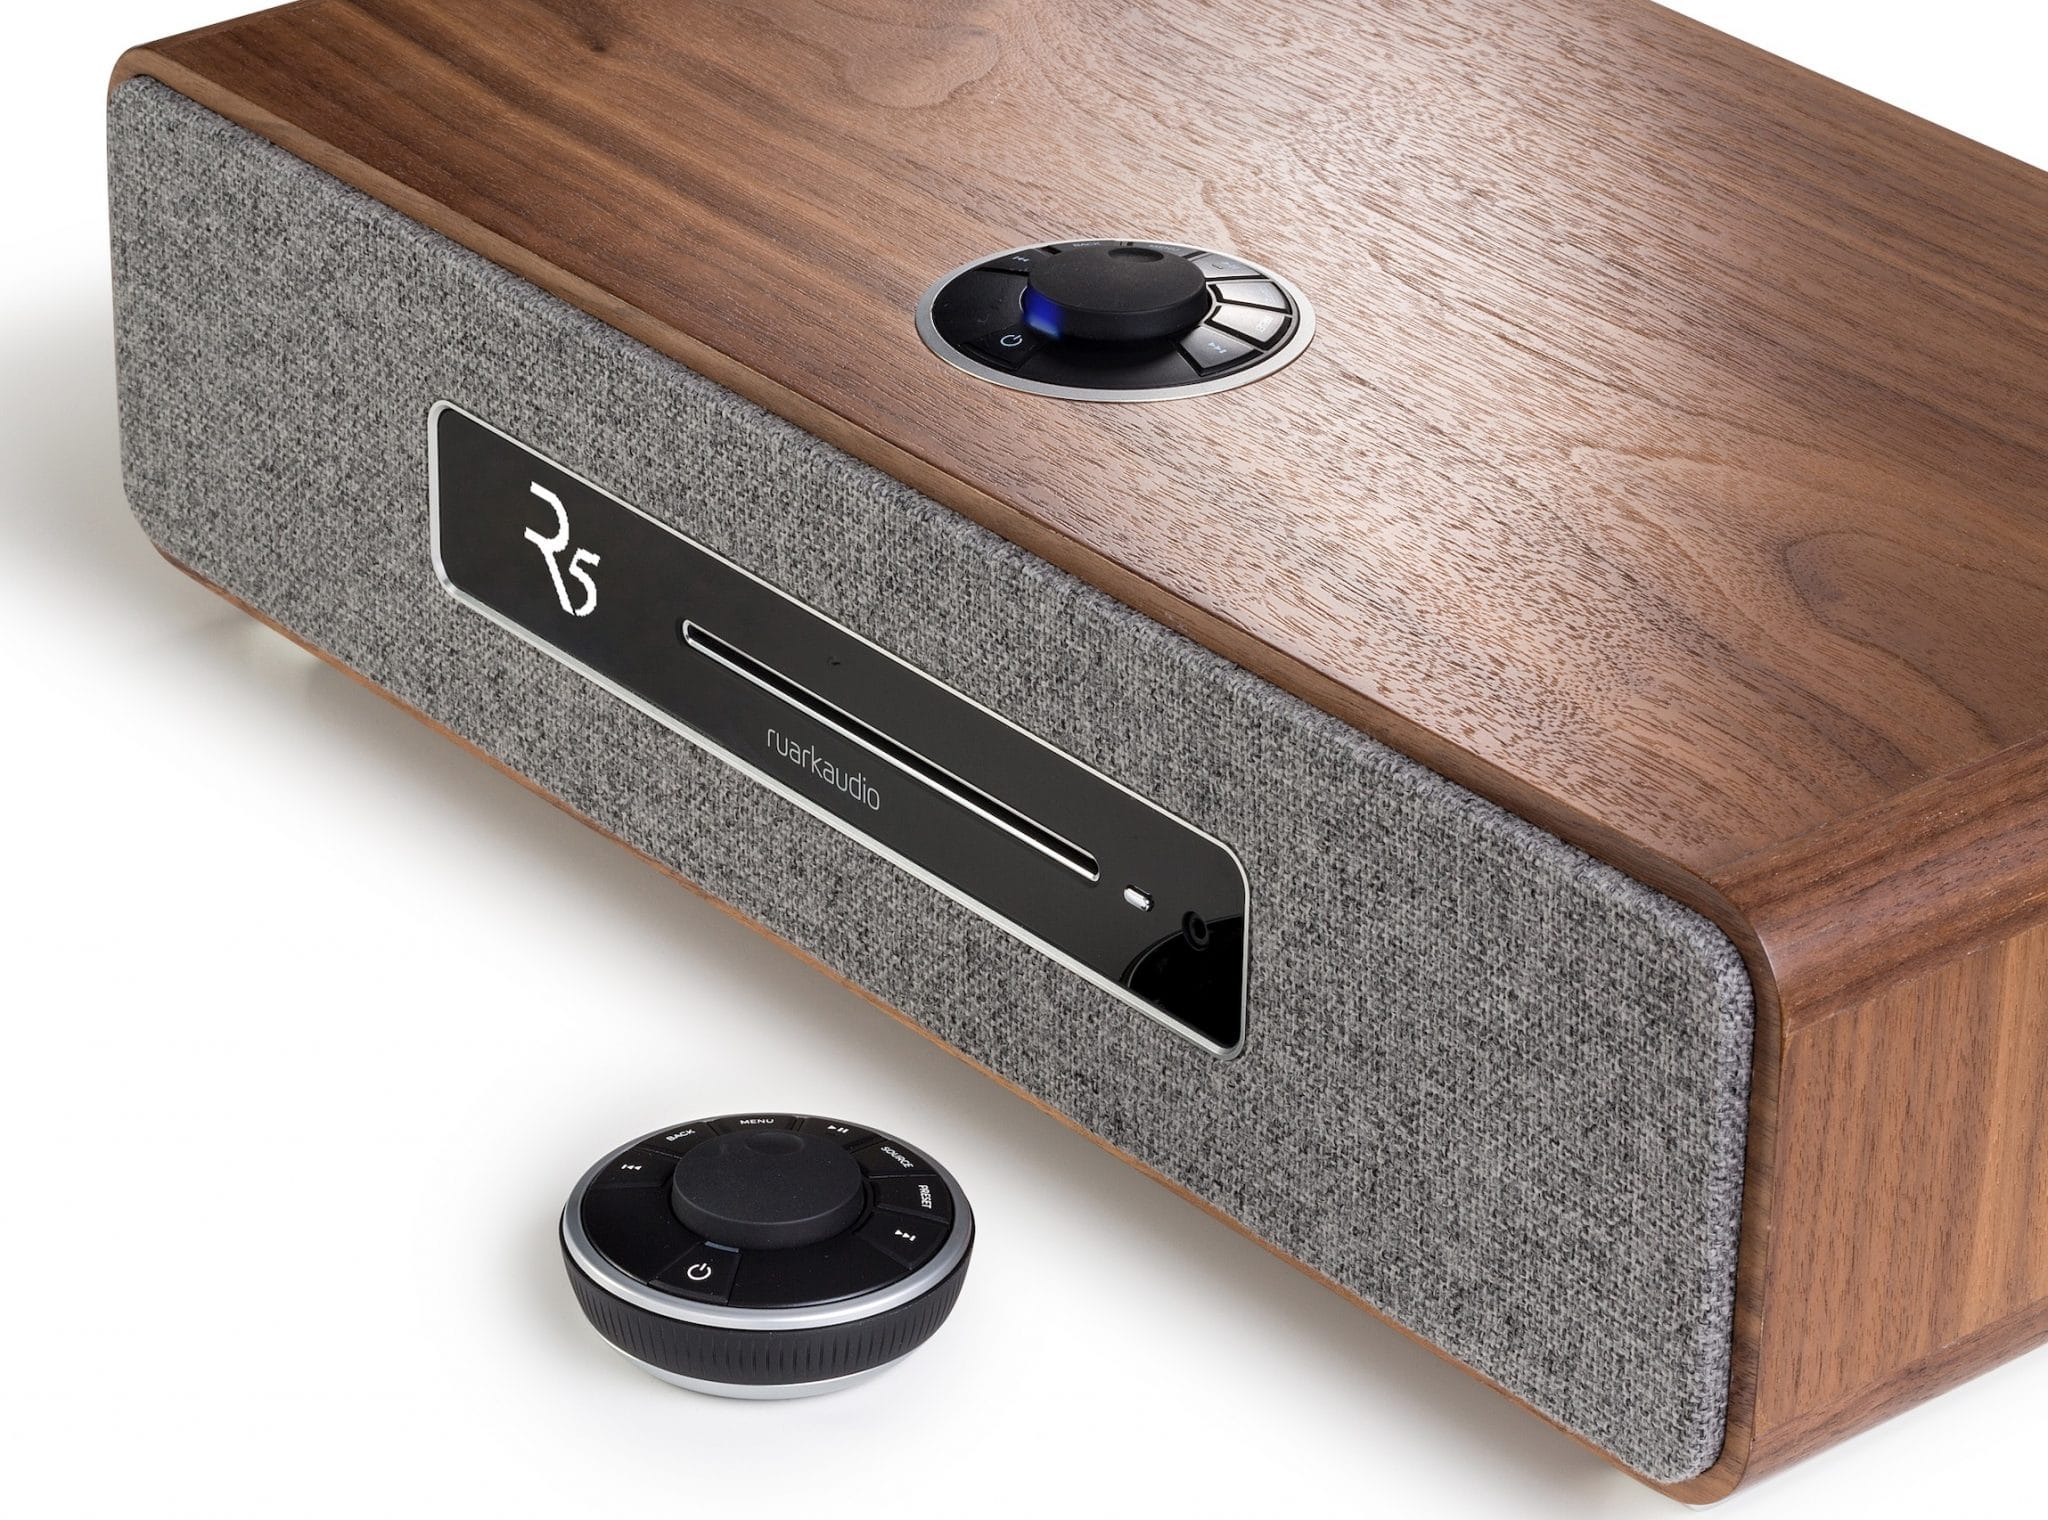 R5 Music System From Ruark